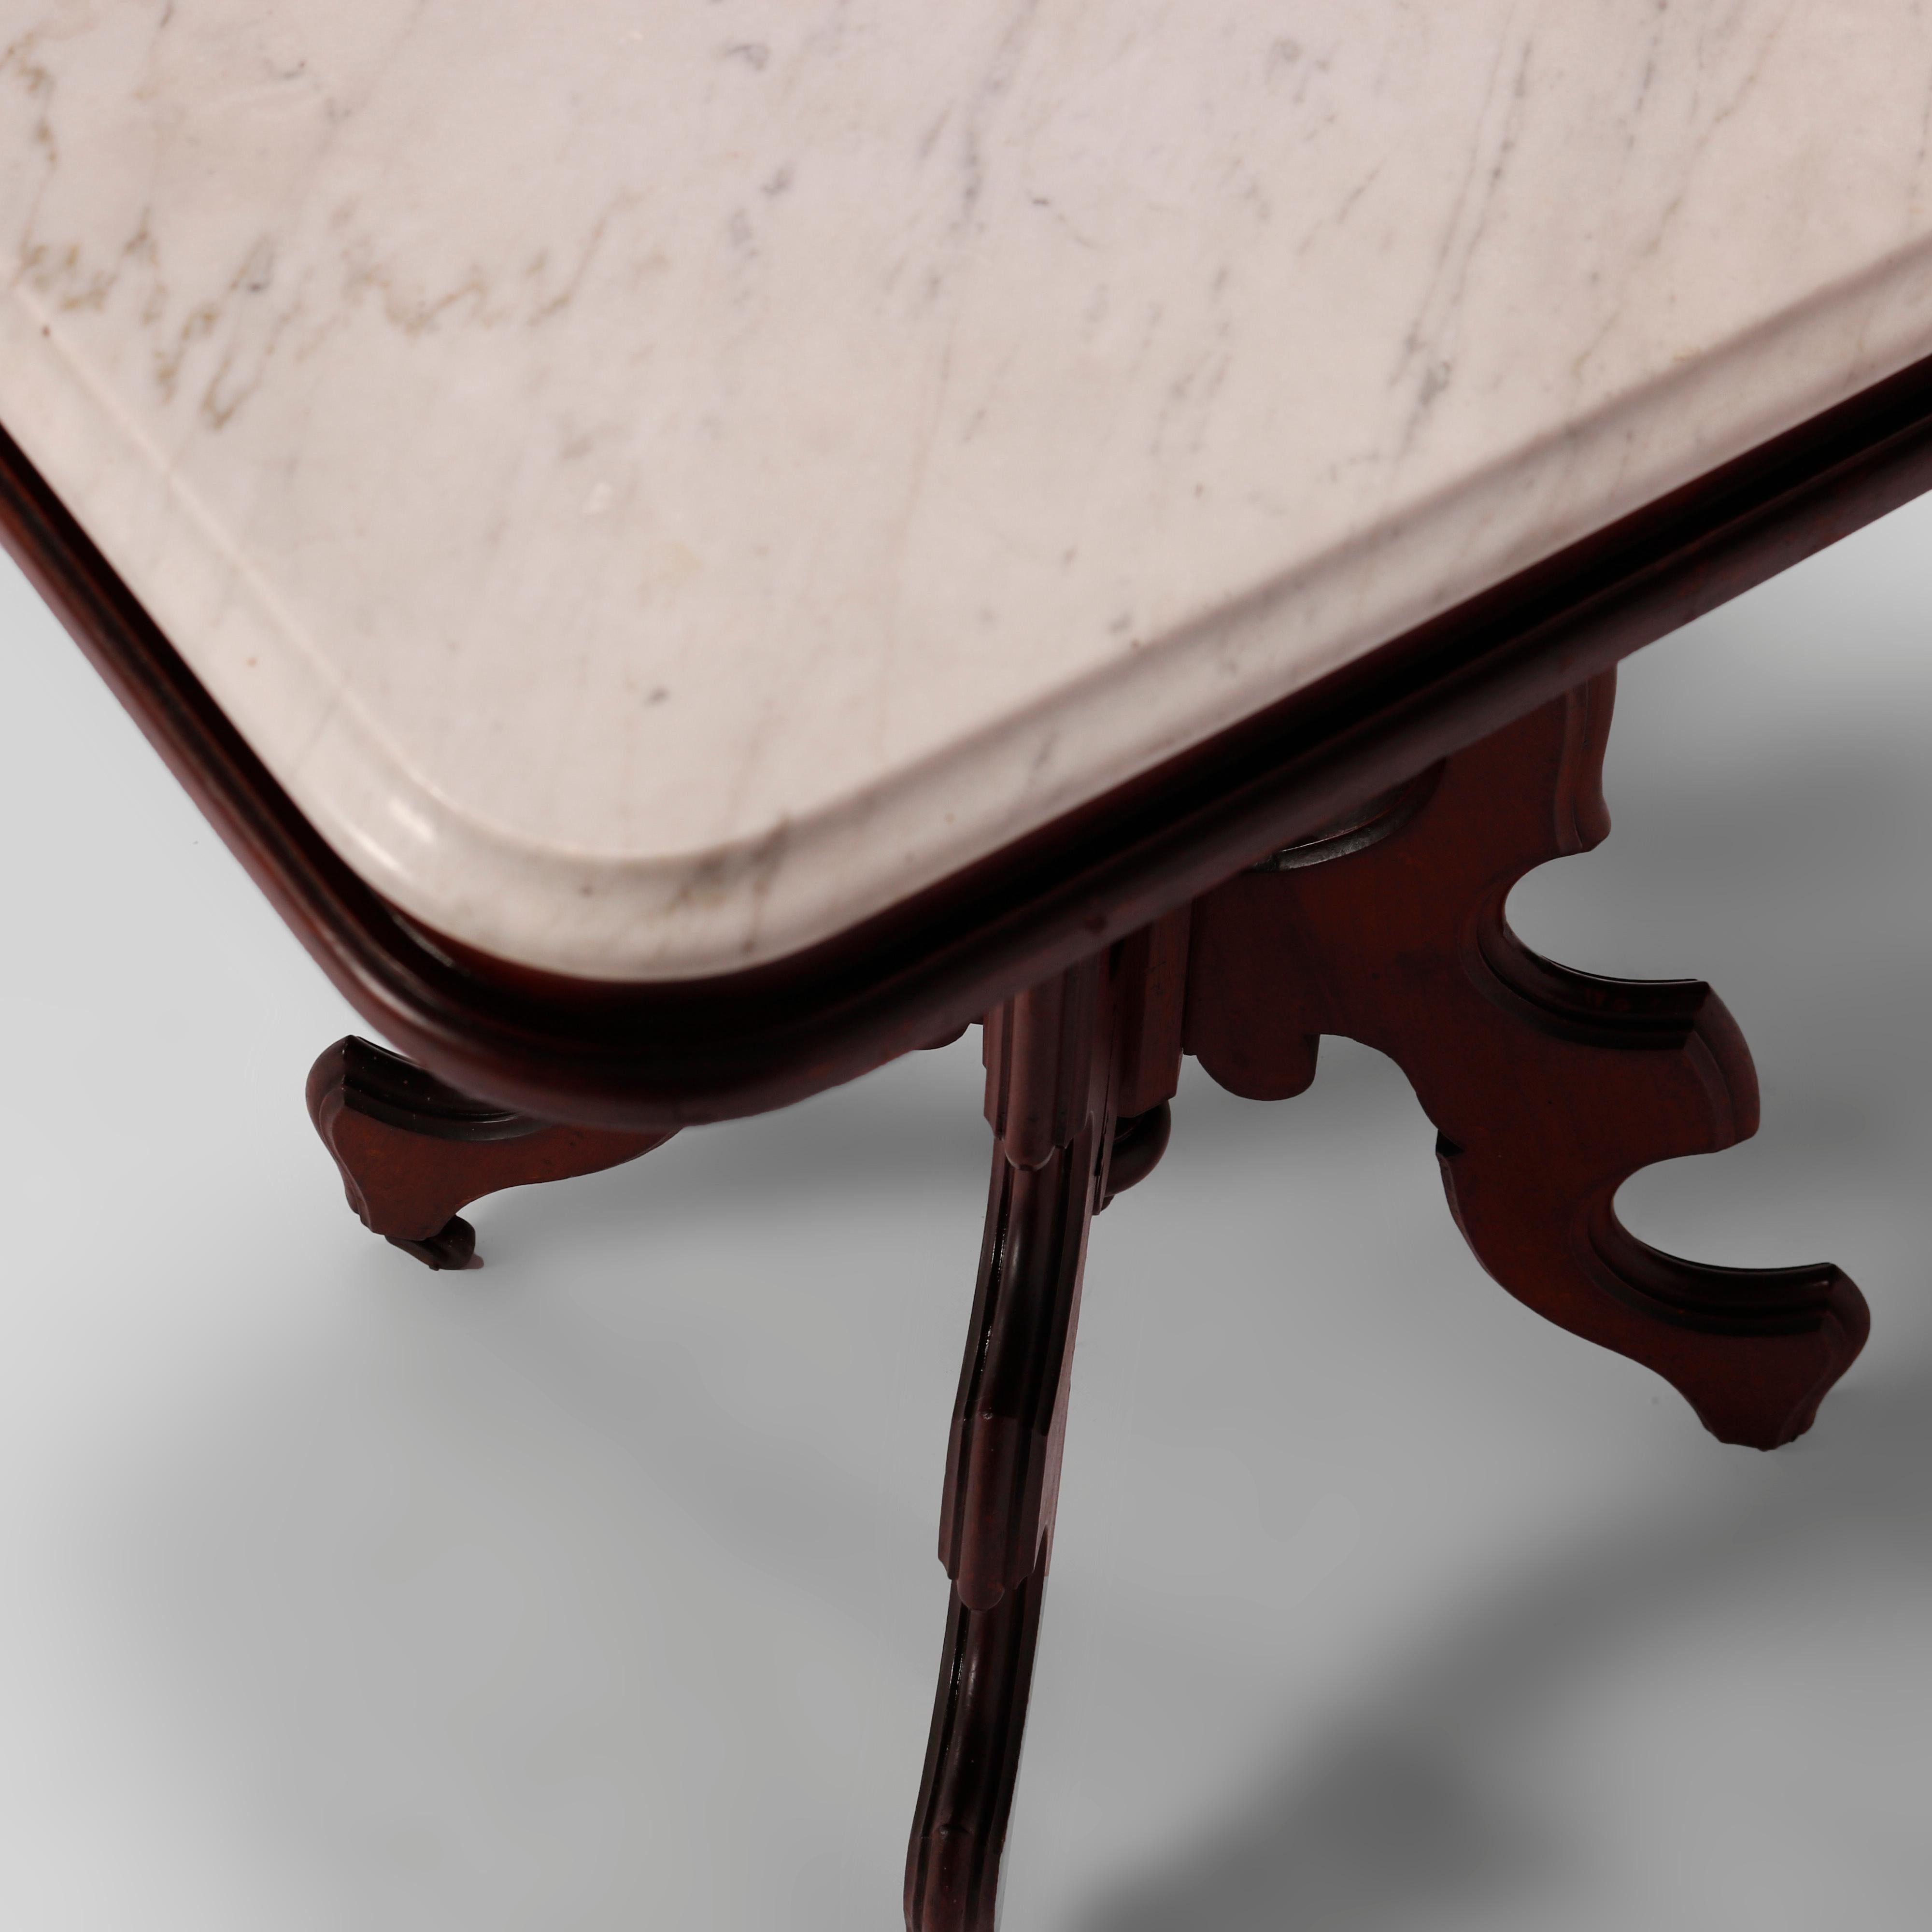 Antique Eastlake Marble Top Parlor Table, Circa 1890 For Sale 1